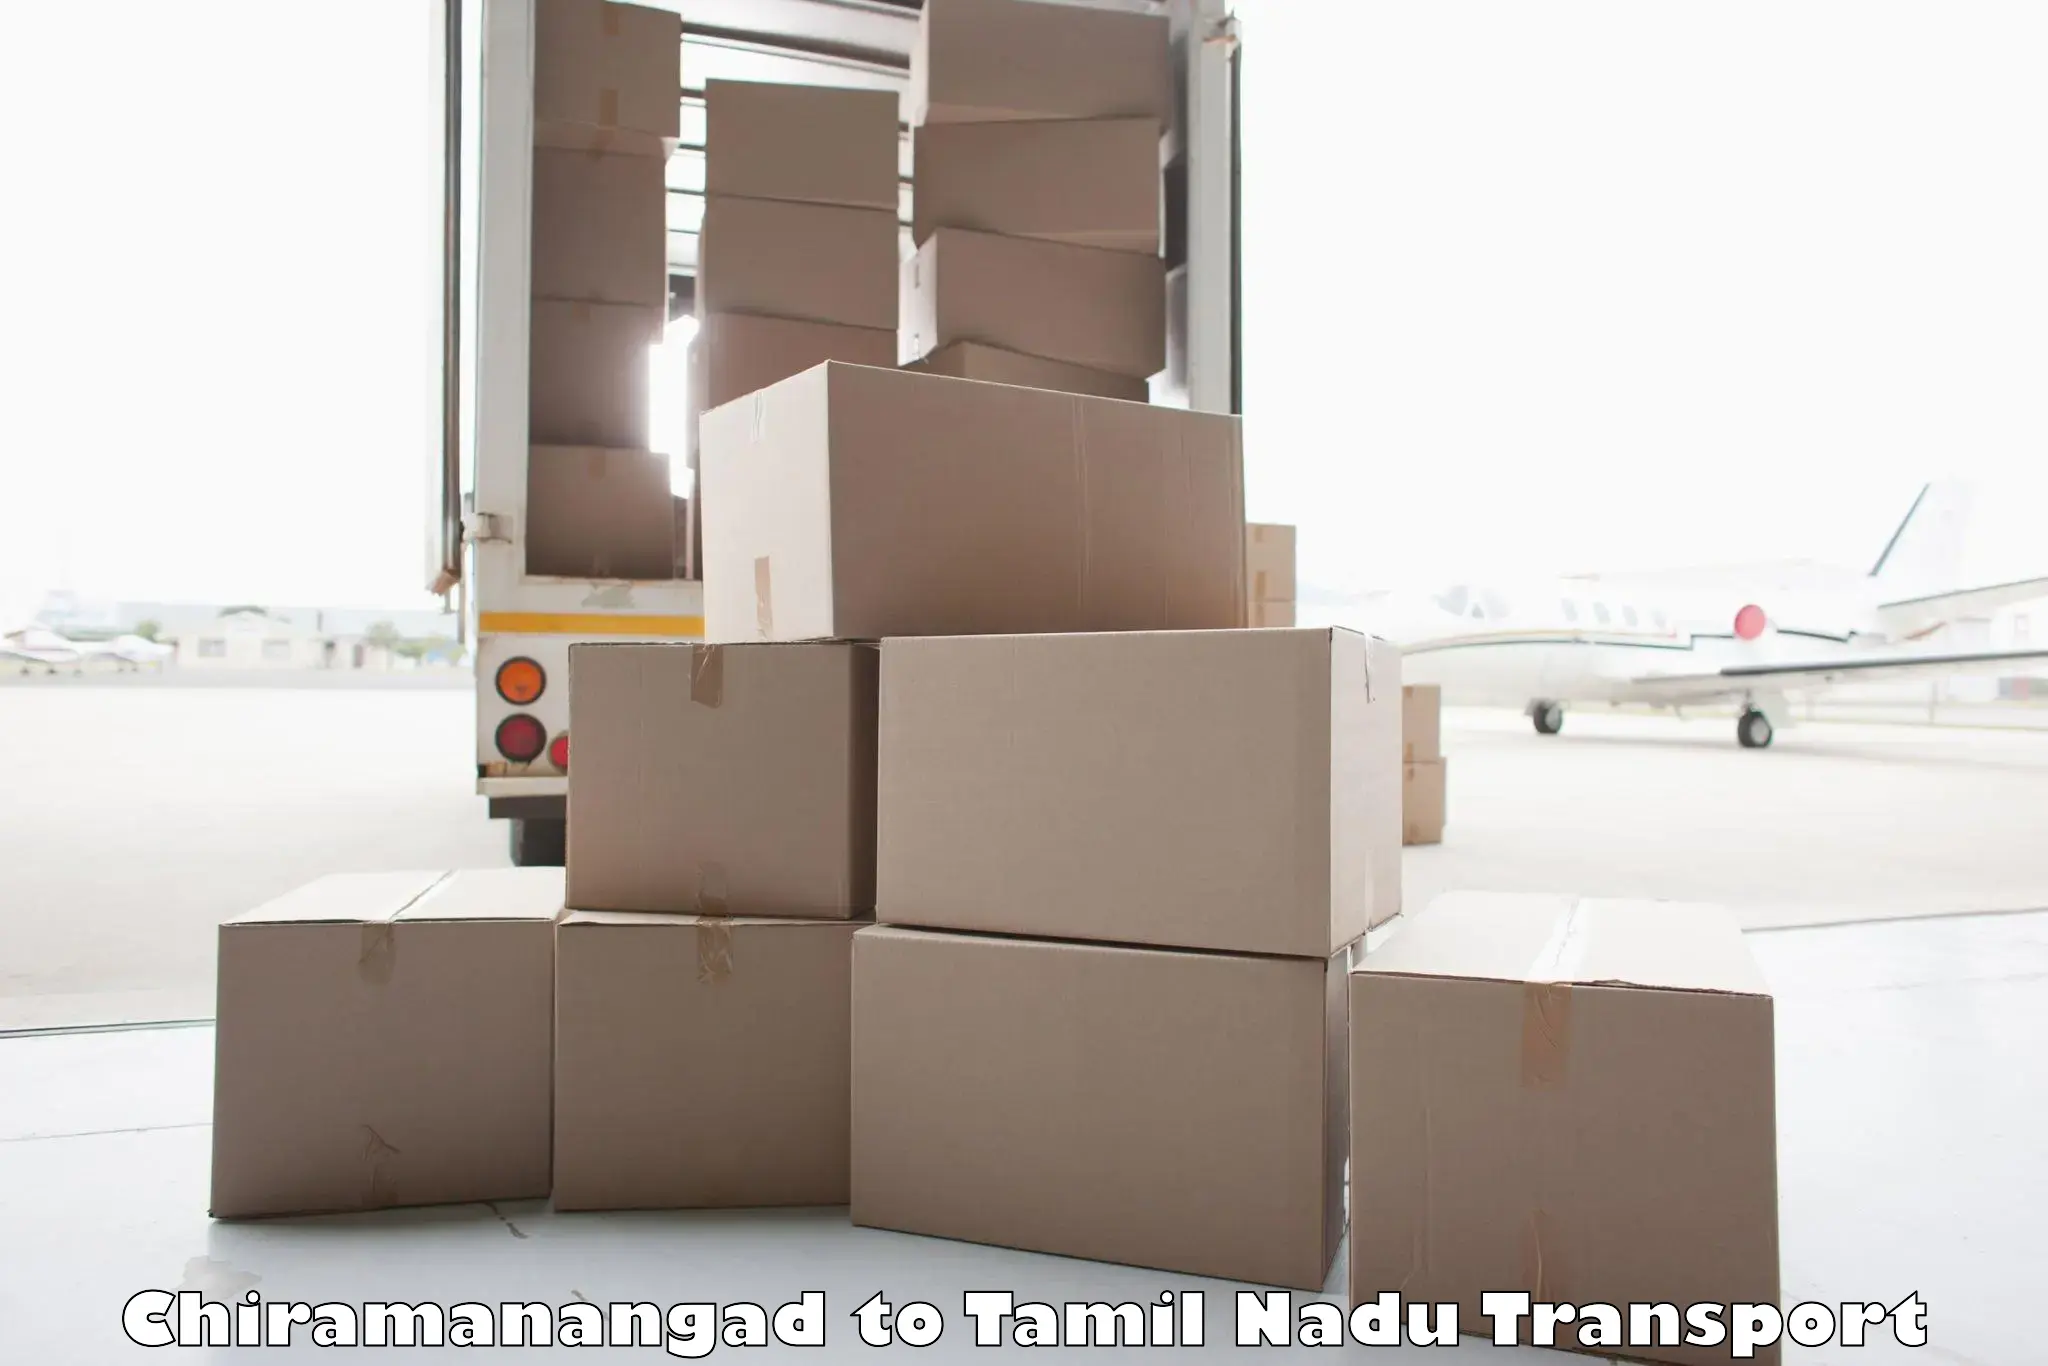 Container transportation services Chiramanangad to Ennore Port Chennai